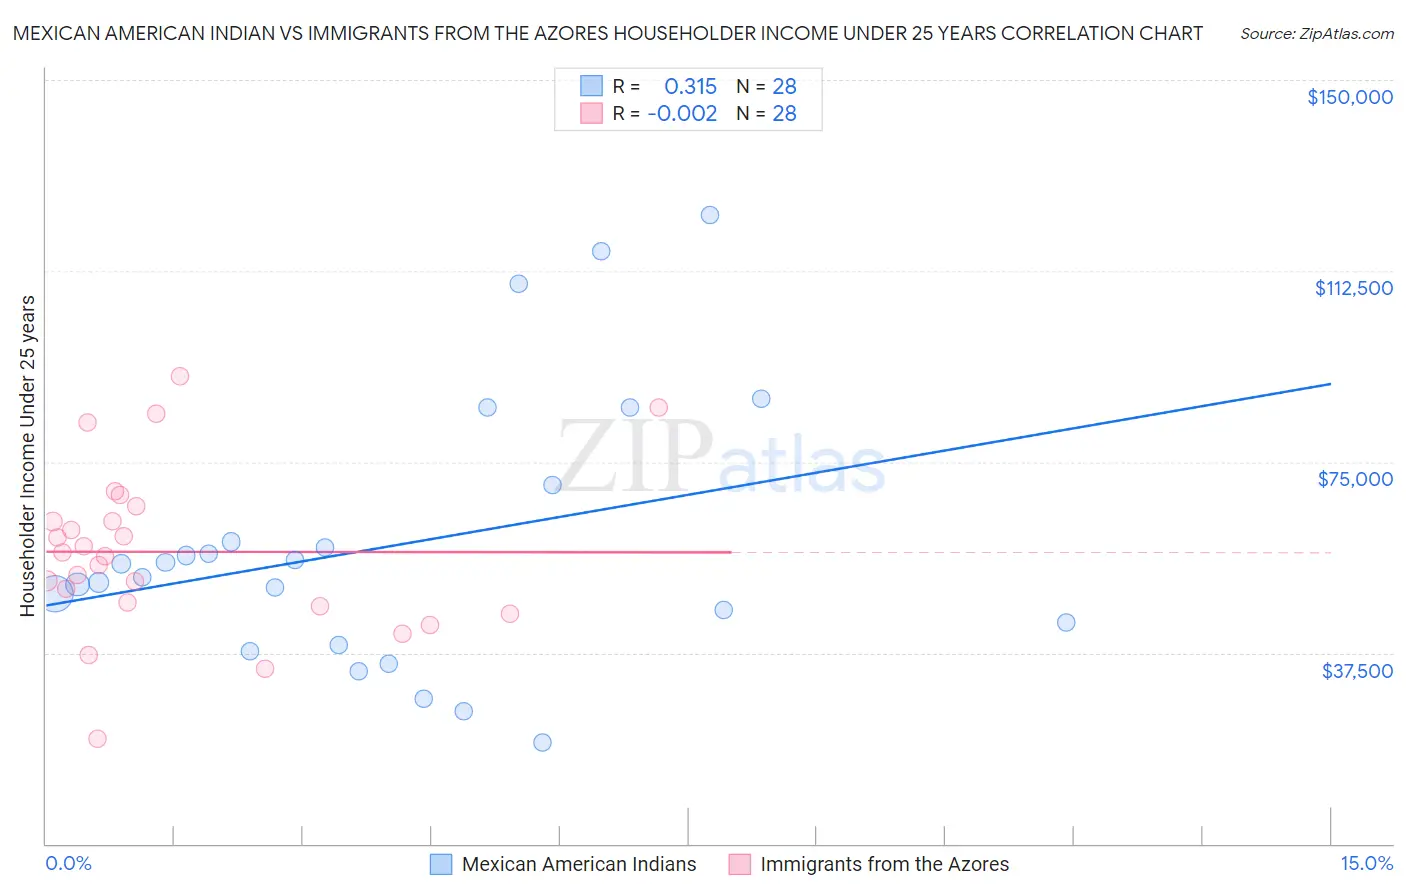 Mexican American Indian vs Immigrants from the Azores Householder Income Under 25 years